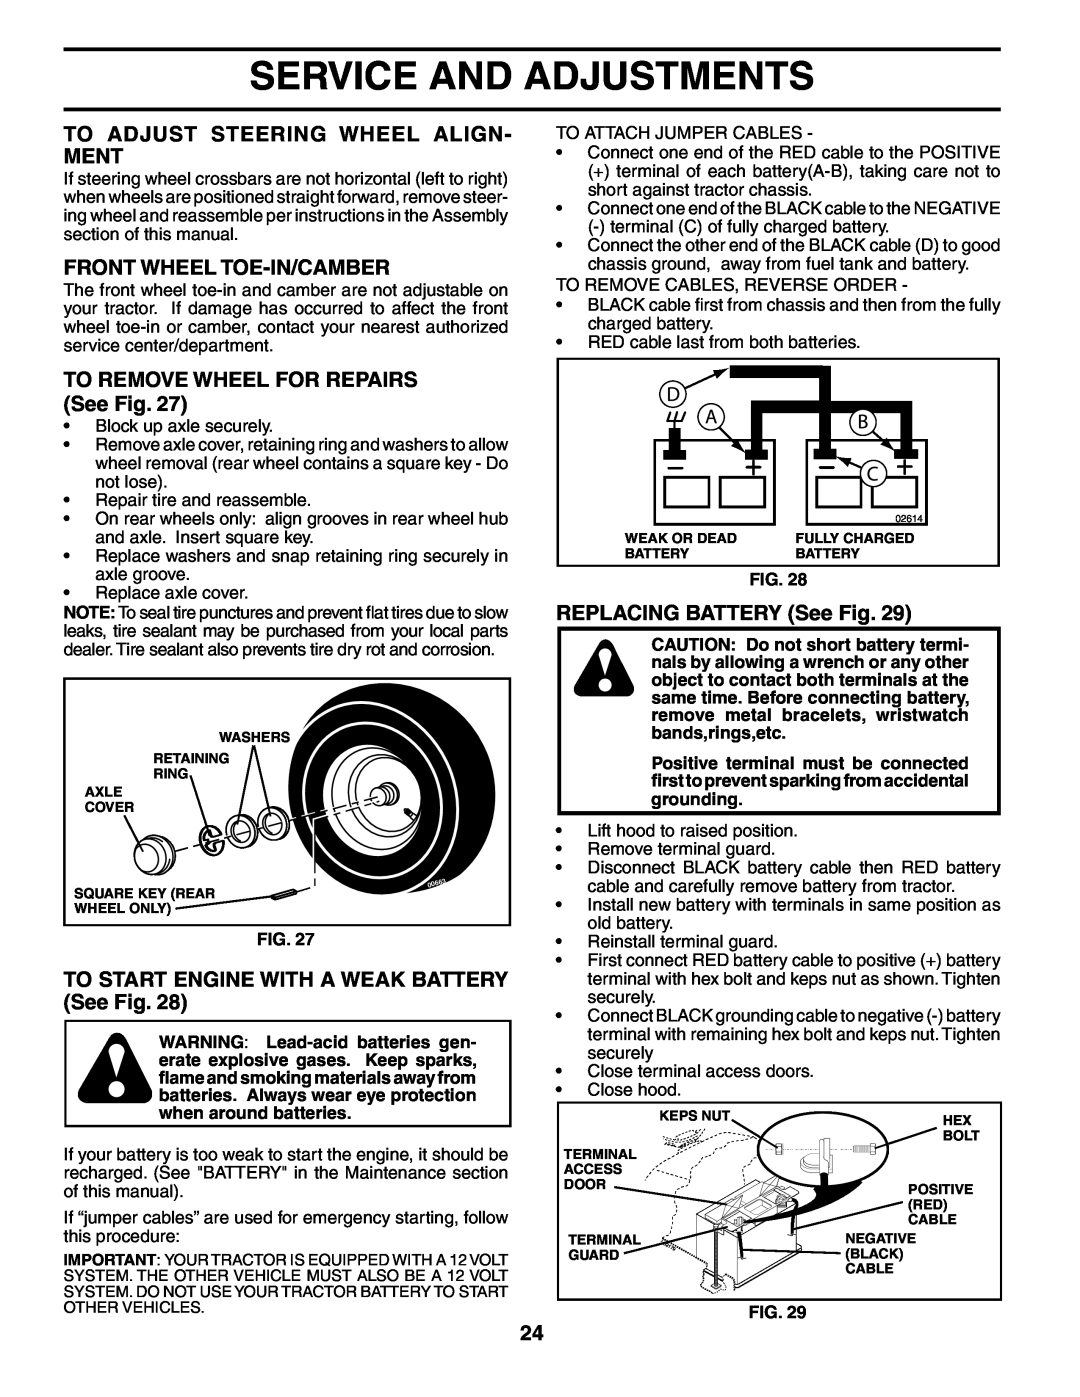 Poulan PD25PH48STE To Adjust Steering Wheel Align- Ment, Front Wheel Toe-In/Camber, TO REMOVE WHEEL FOR REPAIRS See Fig 